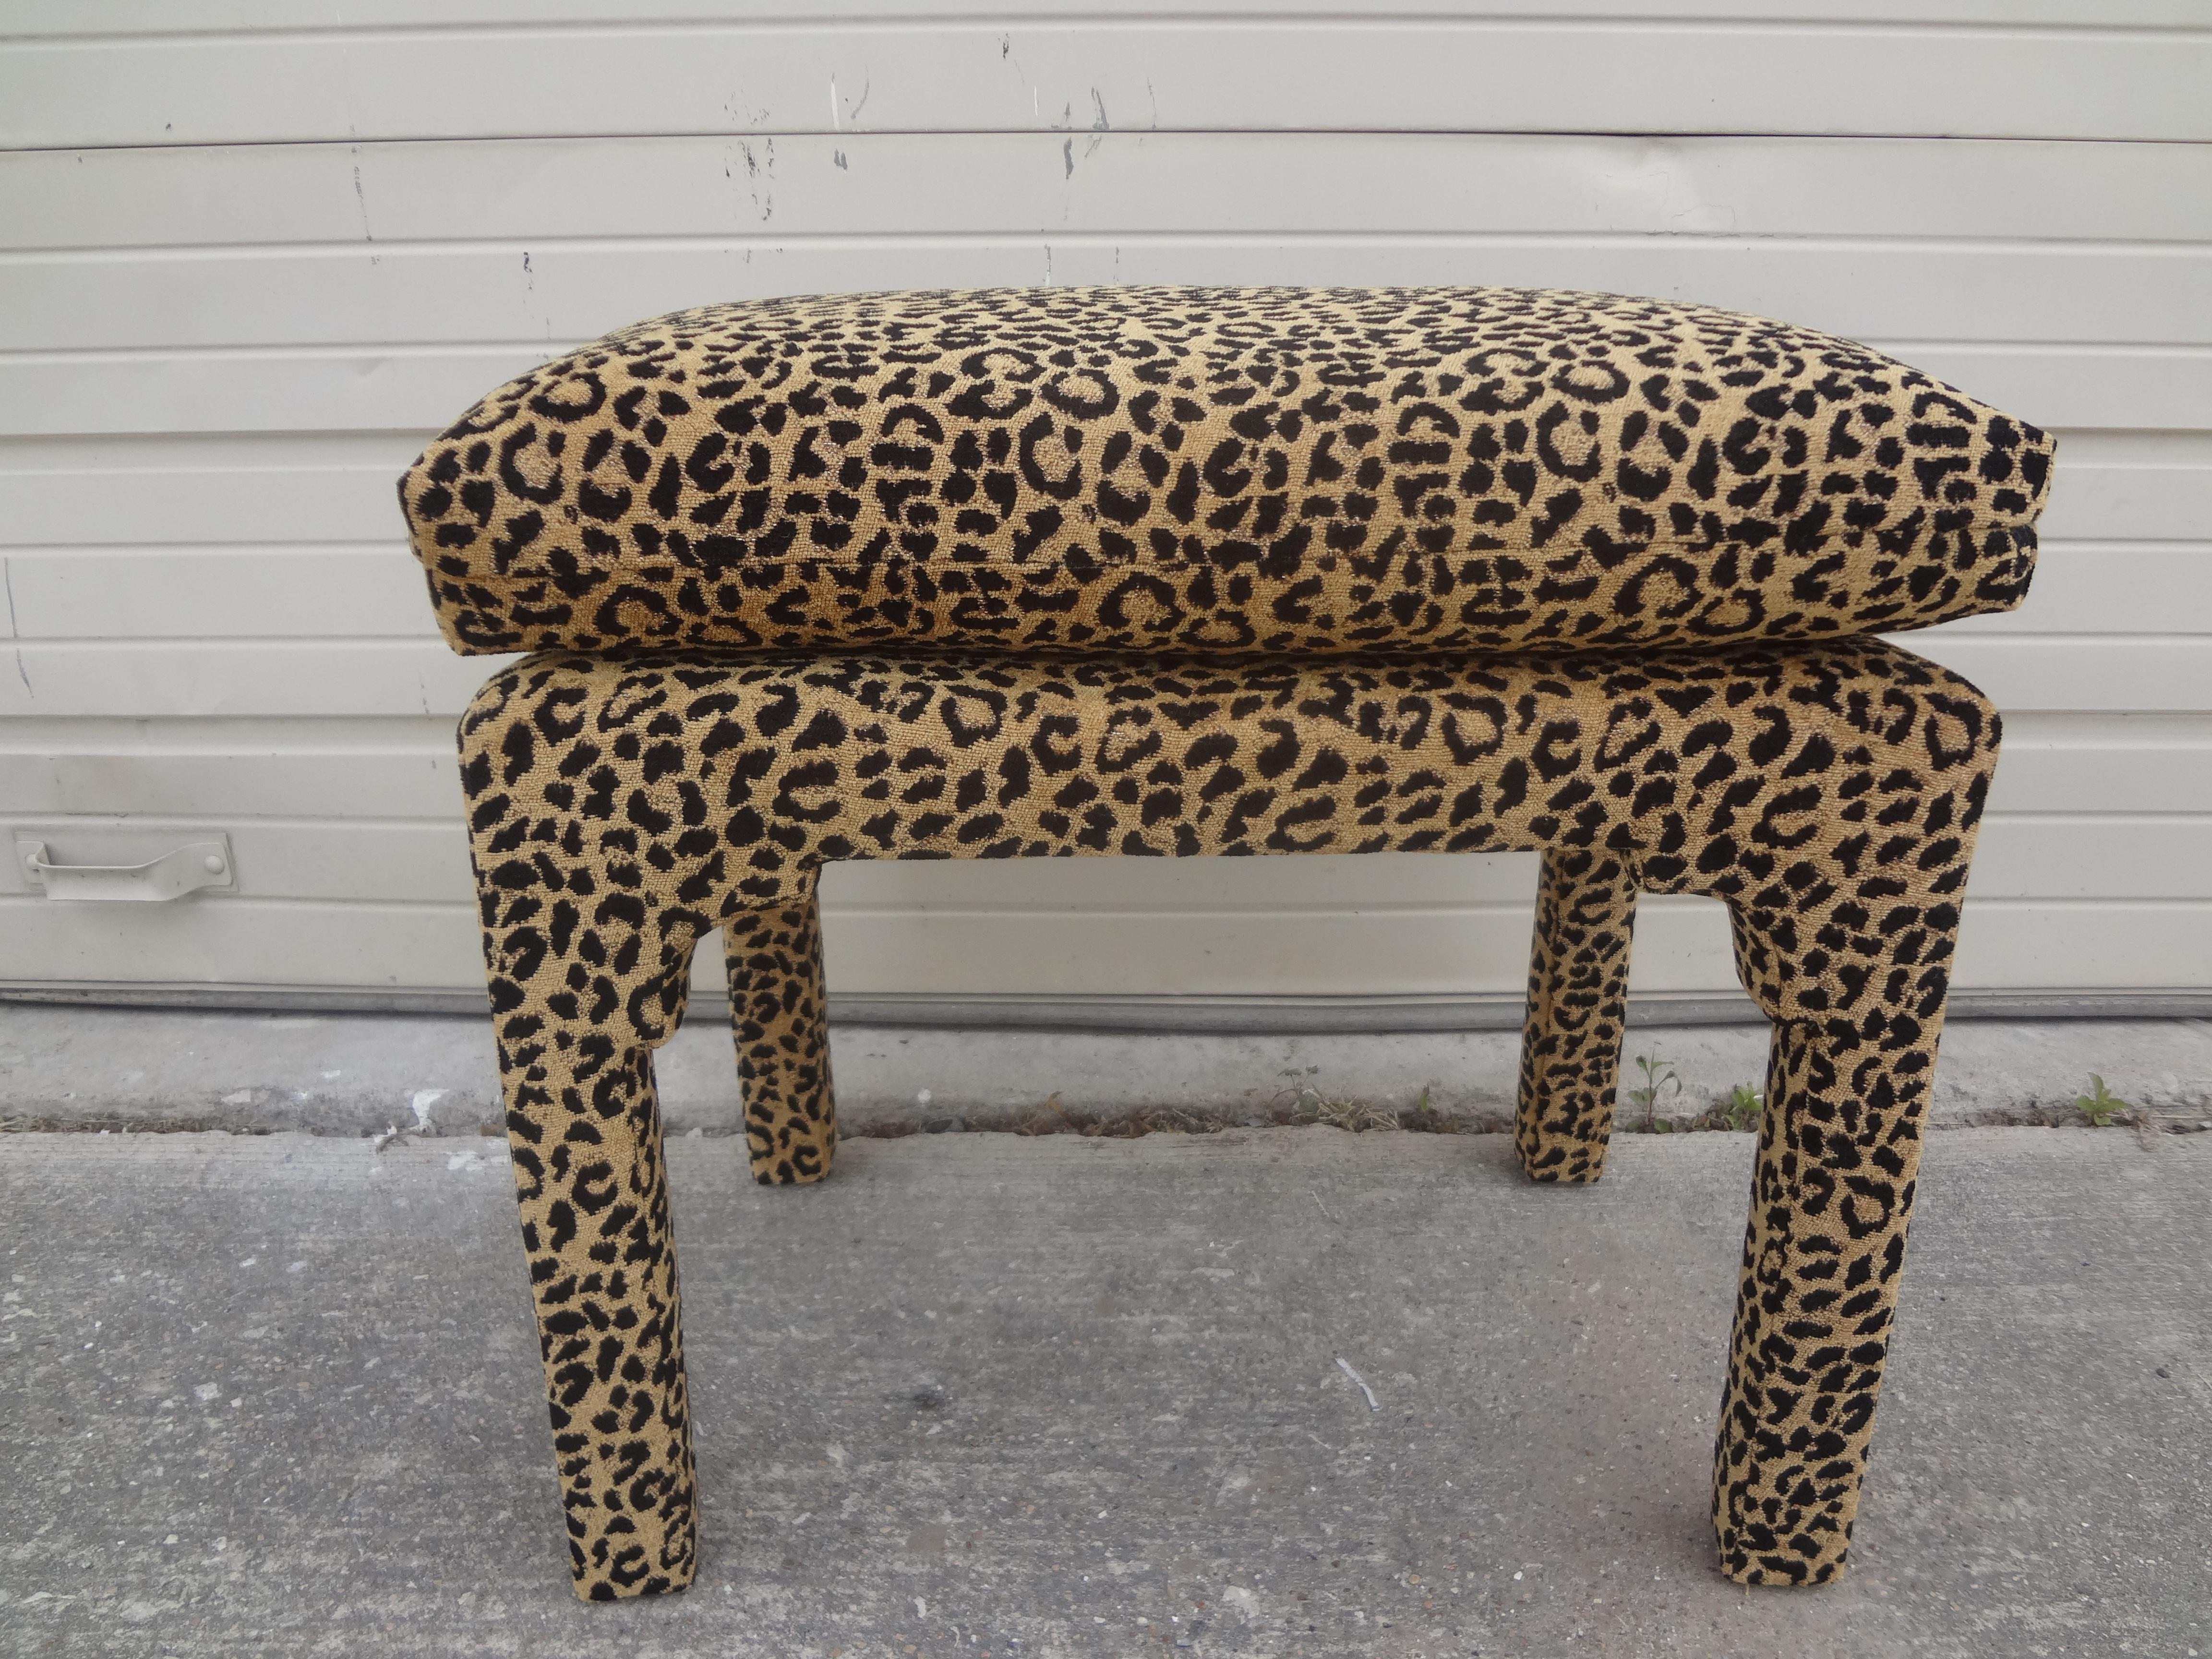 Stunning midcentury Milo Baughman Parsons style upholstered ottoman. This gorgeous Hollywood Regency Parsons ottoman, stool or bench has been professionally upholstered in a leopard print chenille fabric. Great size: 20.5 inches H, 22.25 inches W,